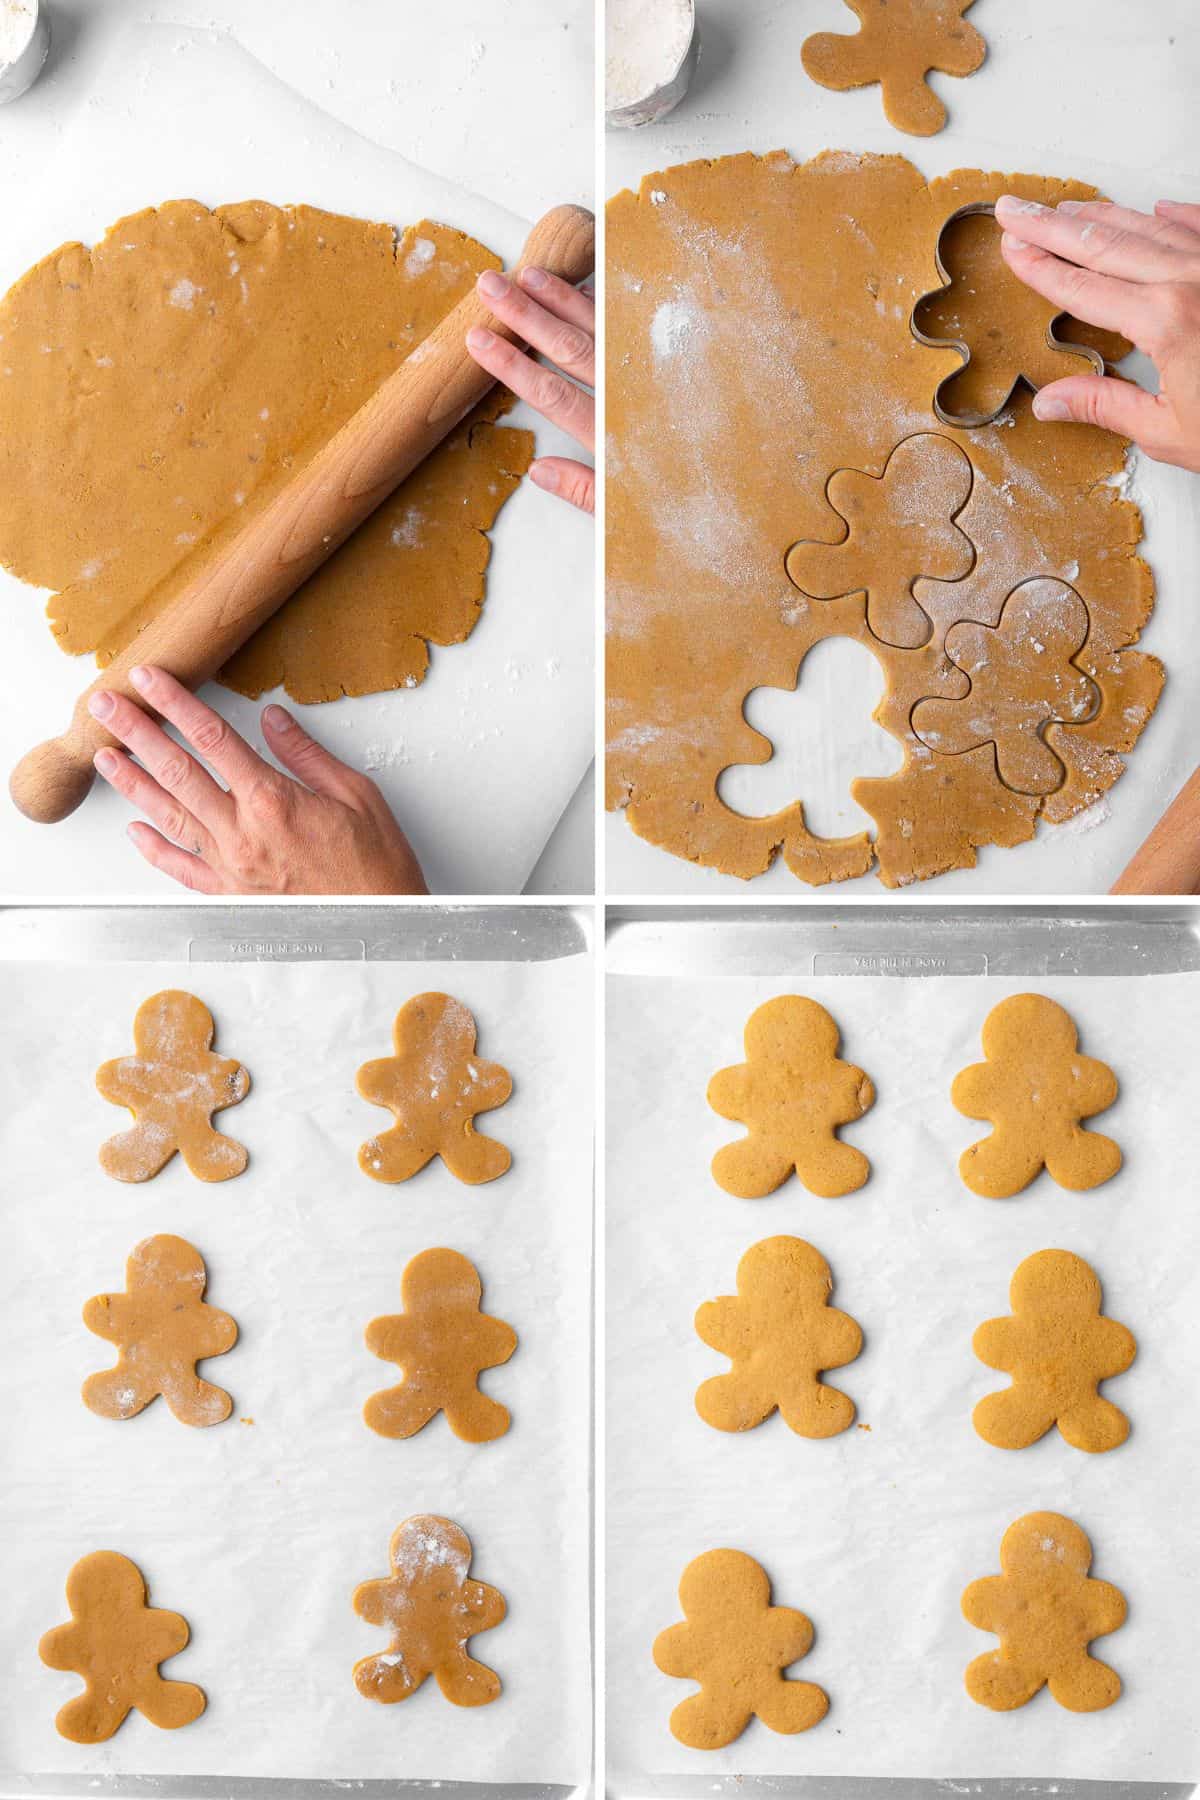 4 image collage preparing dough for baking: 1- rolling out dough with a rolling pin, 2- pressing dough with a cookie cutting, 3- cookie cutter cookies on parchment paper before baking, -4 after baking.